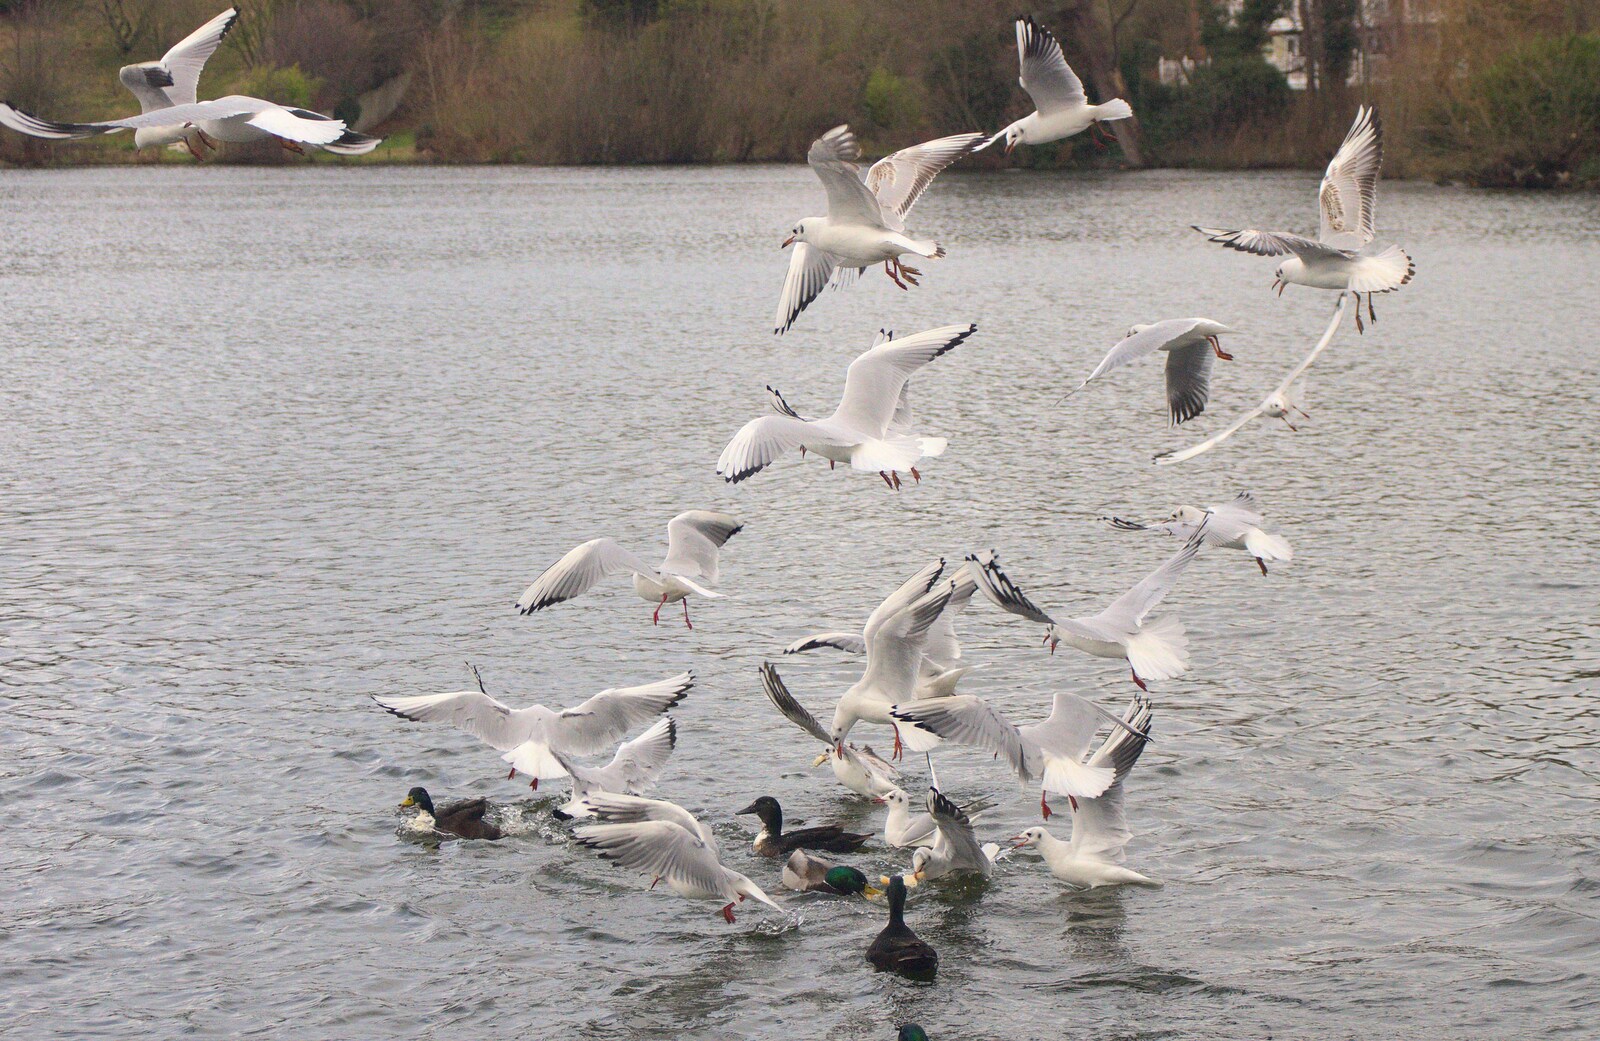 There's a frenzy of gull activity on the Mere from Pizza Express with Grandad, Bury St. Edmunds, Suffolk - 29th December 2011